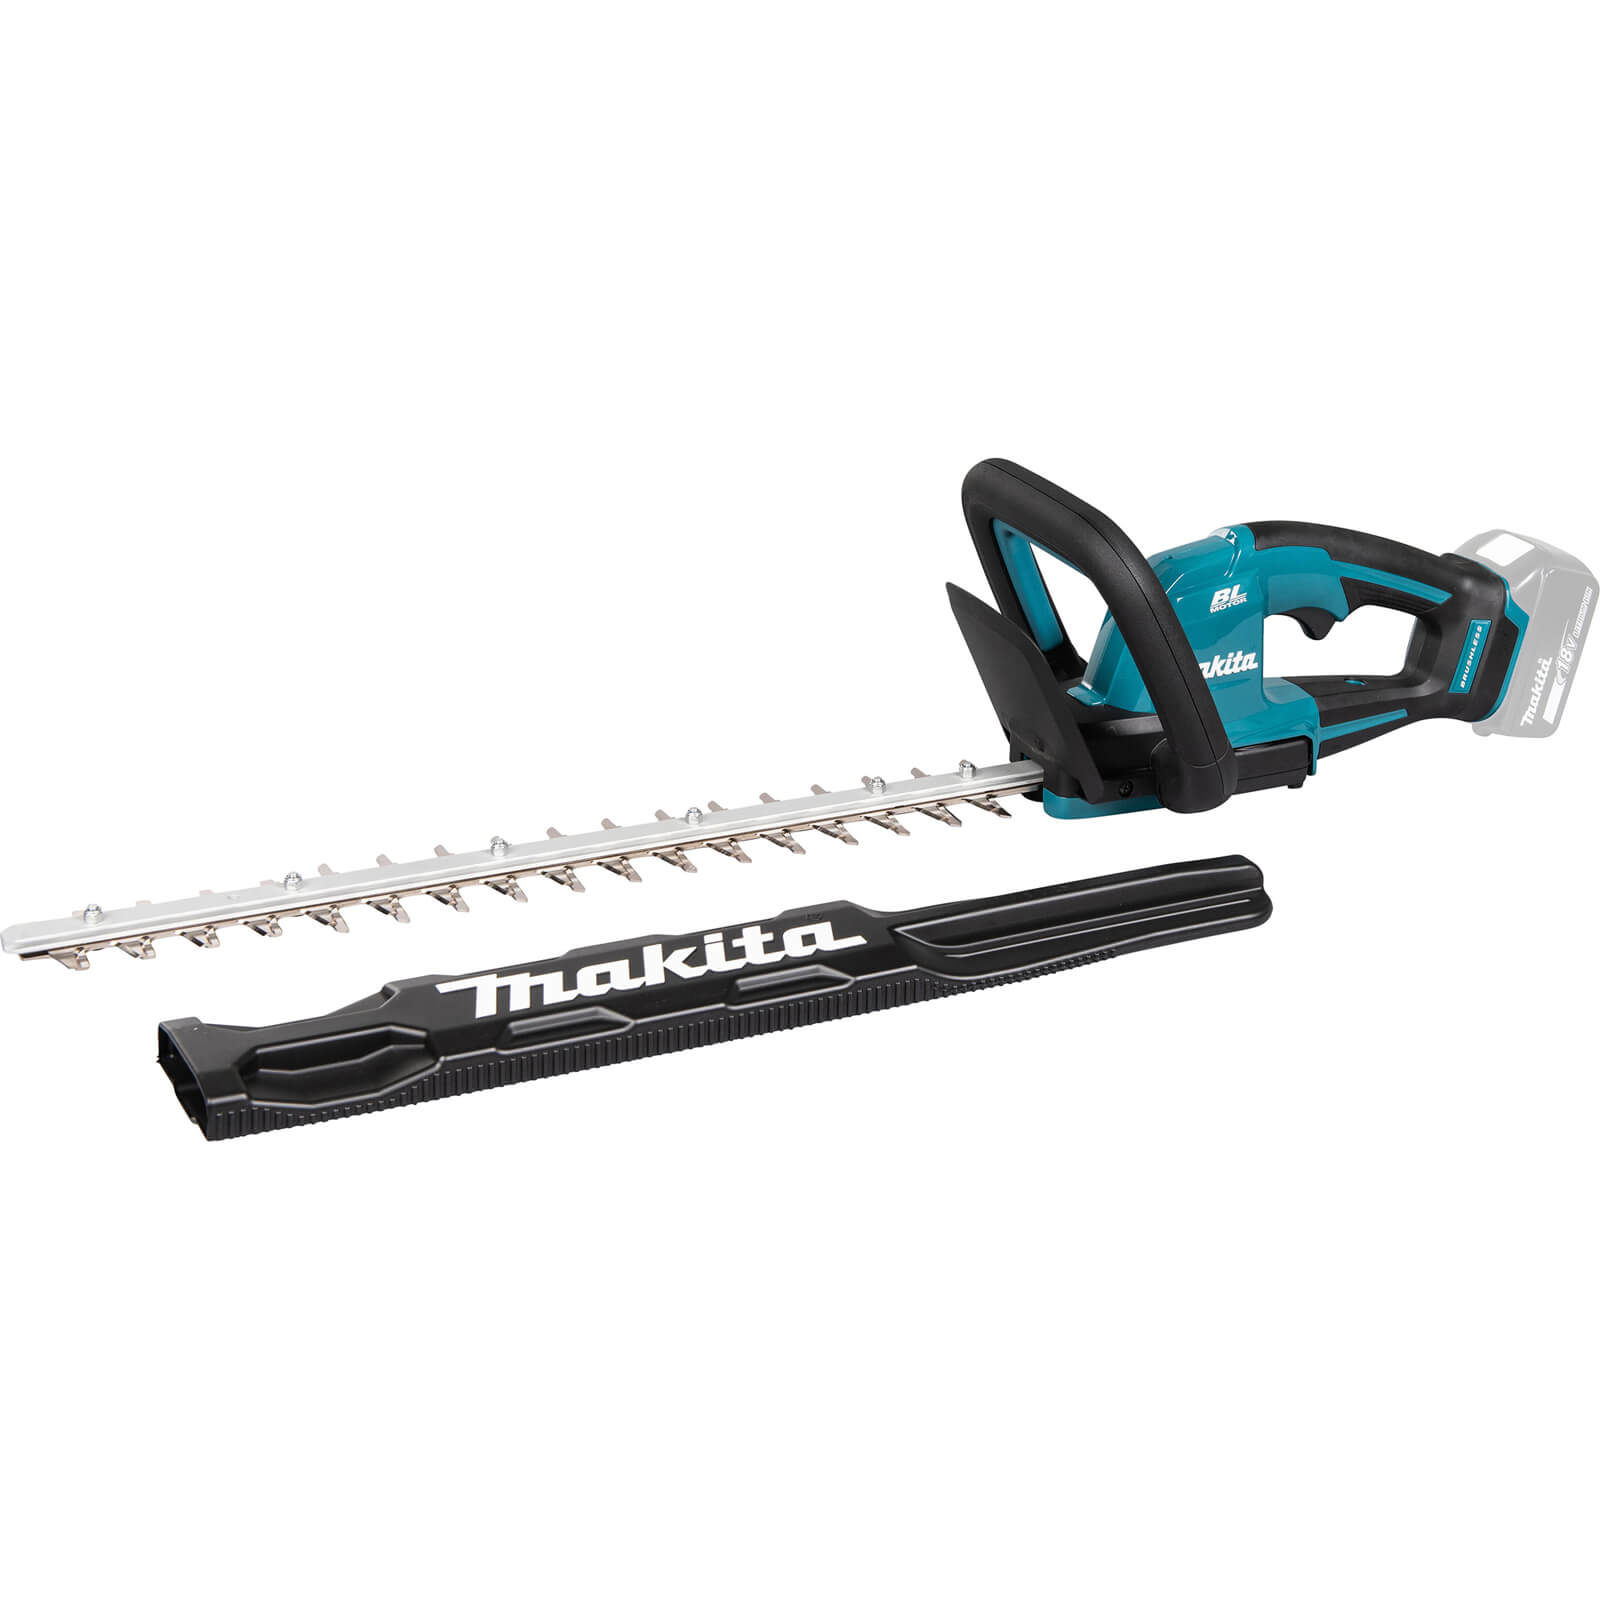 Makita DUH506 18v LXT Cordless Brushless Hedge Trimmer 500mm No Batteries No Charger